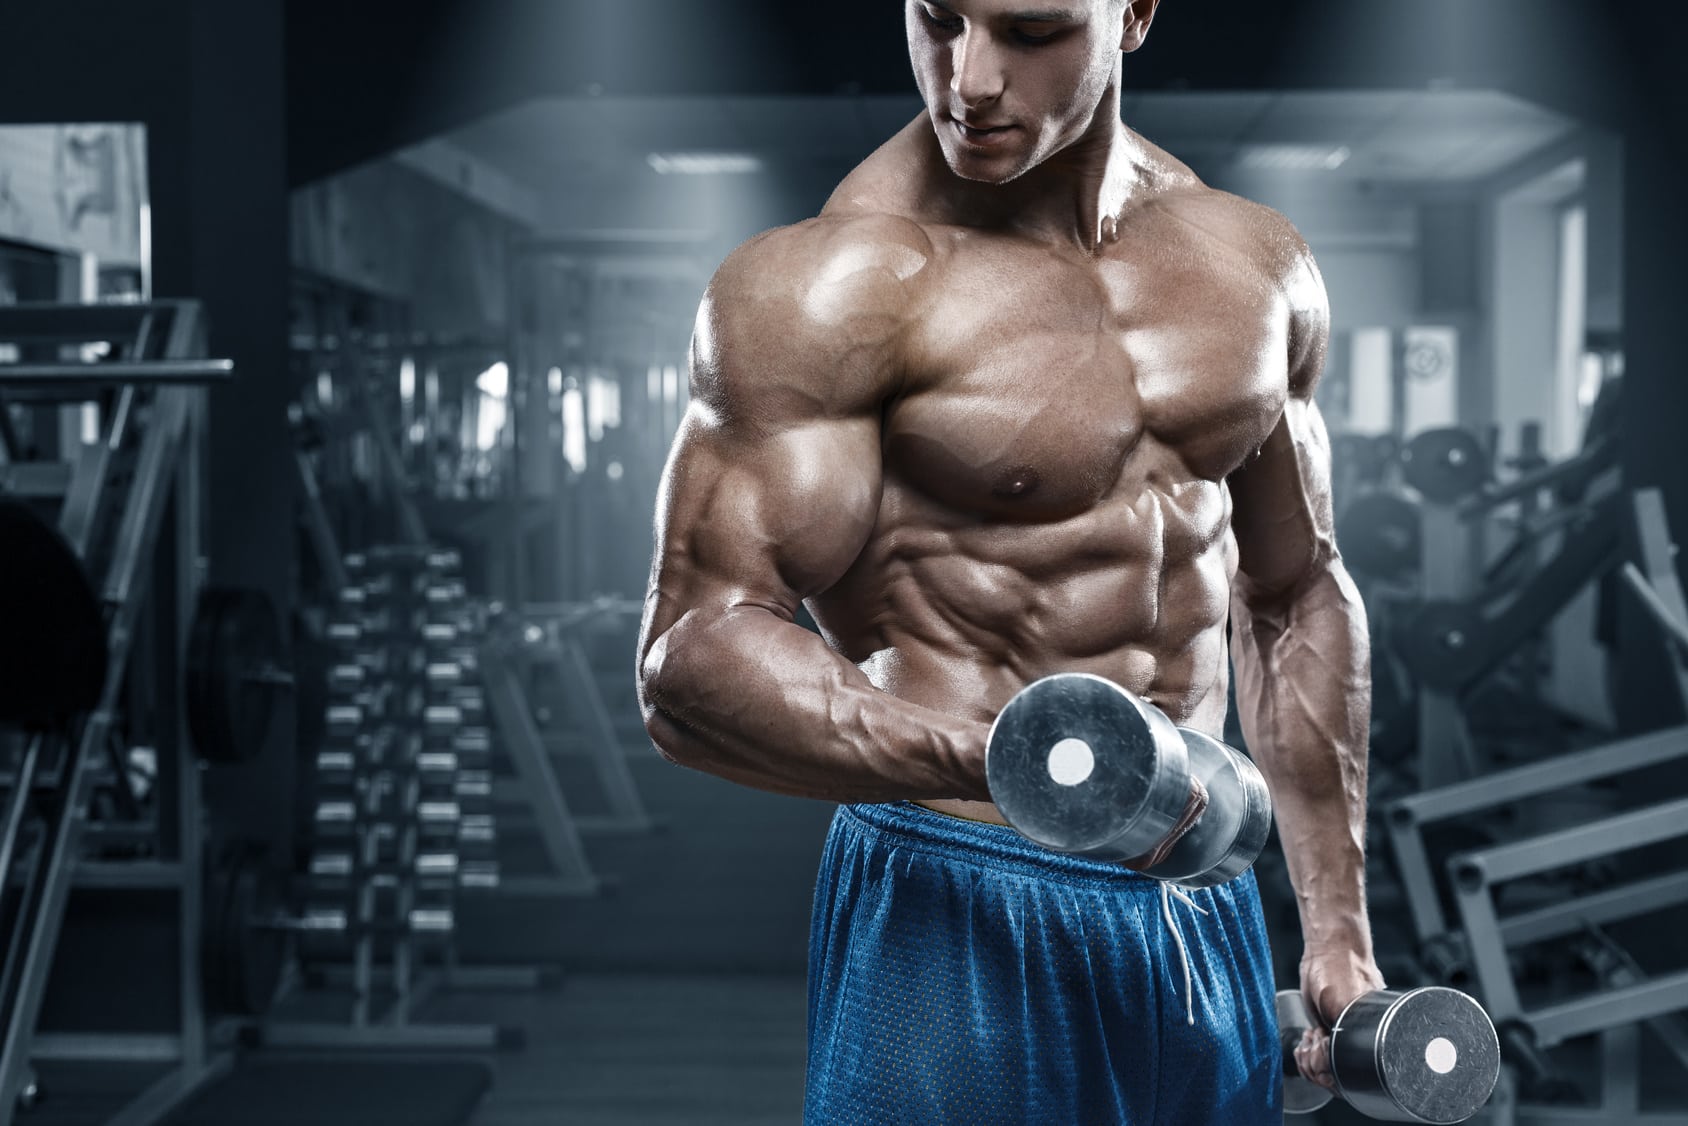 5 Days workout plan for muscle gain.